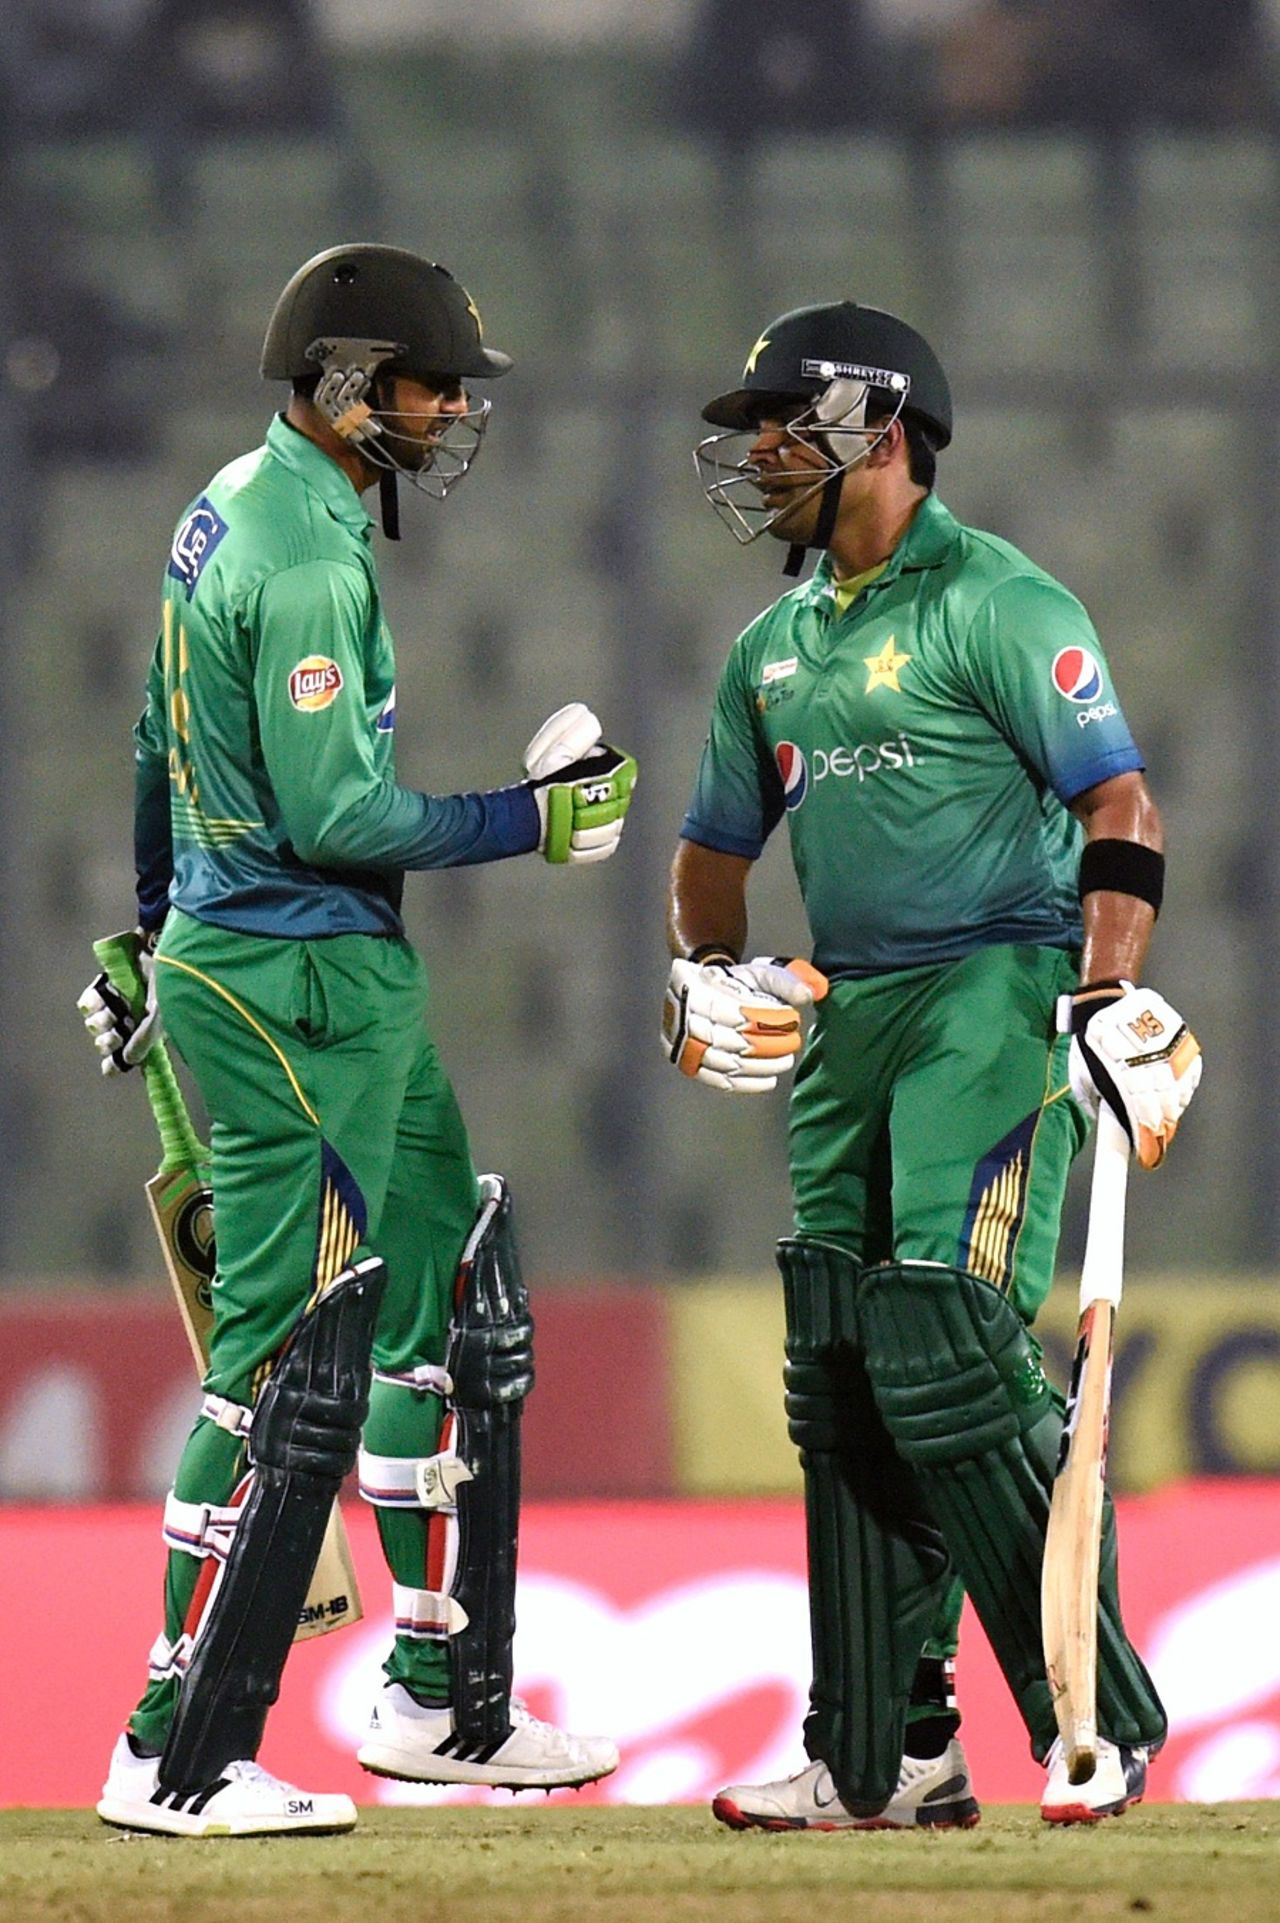 Shoaib Malik and Umar Akmal added 56 for the fourth wicket, Pakistan v Sri Lanka, Asia Cup 2016, Mirpur, March 4, 2016